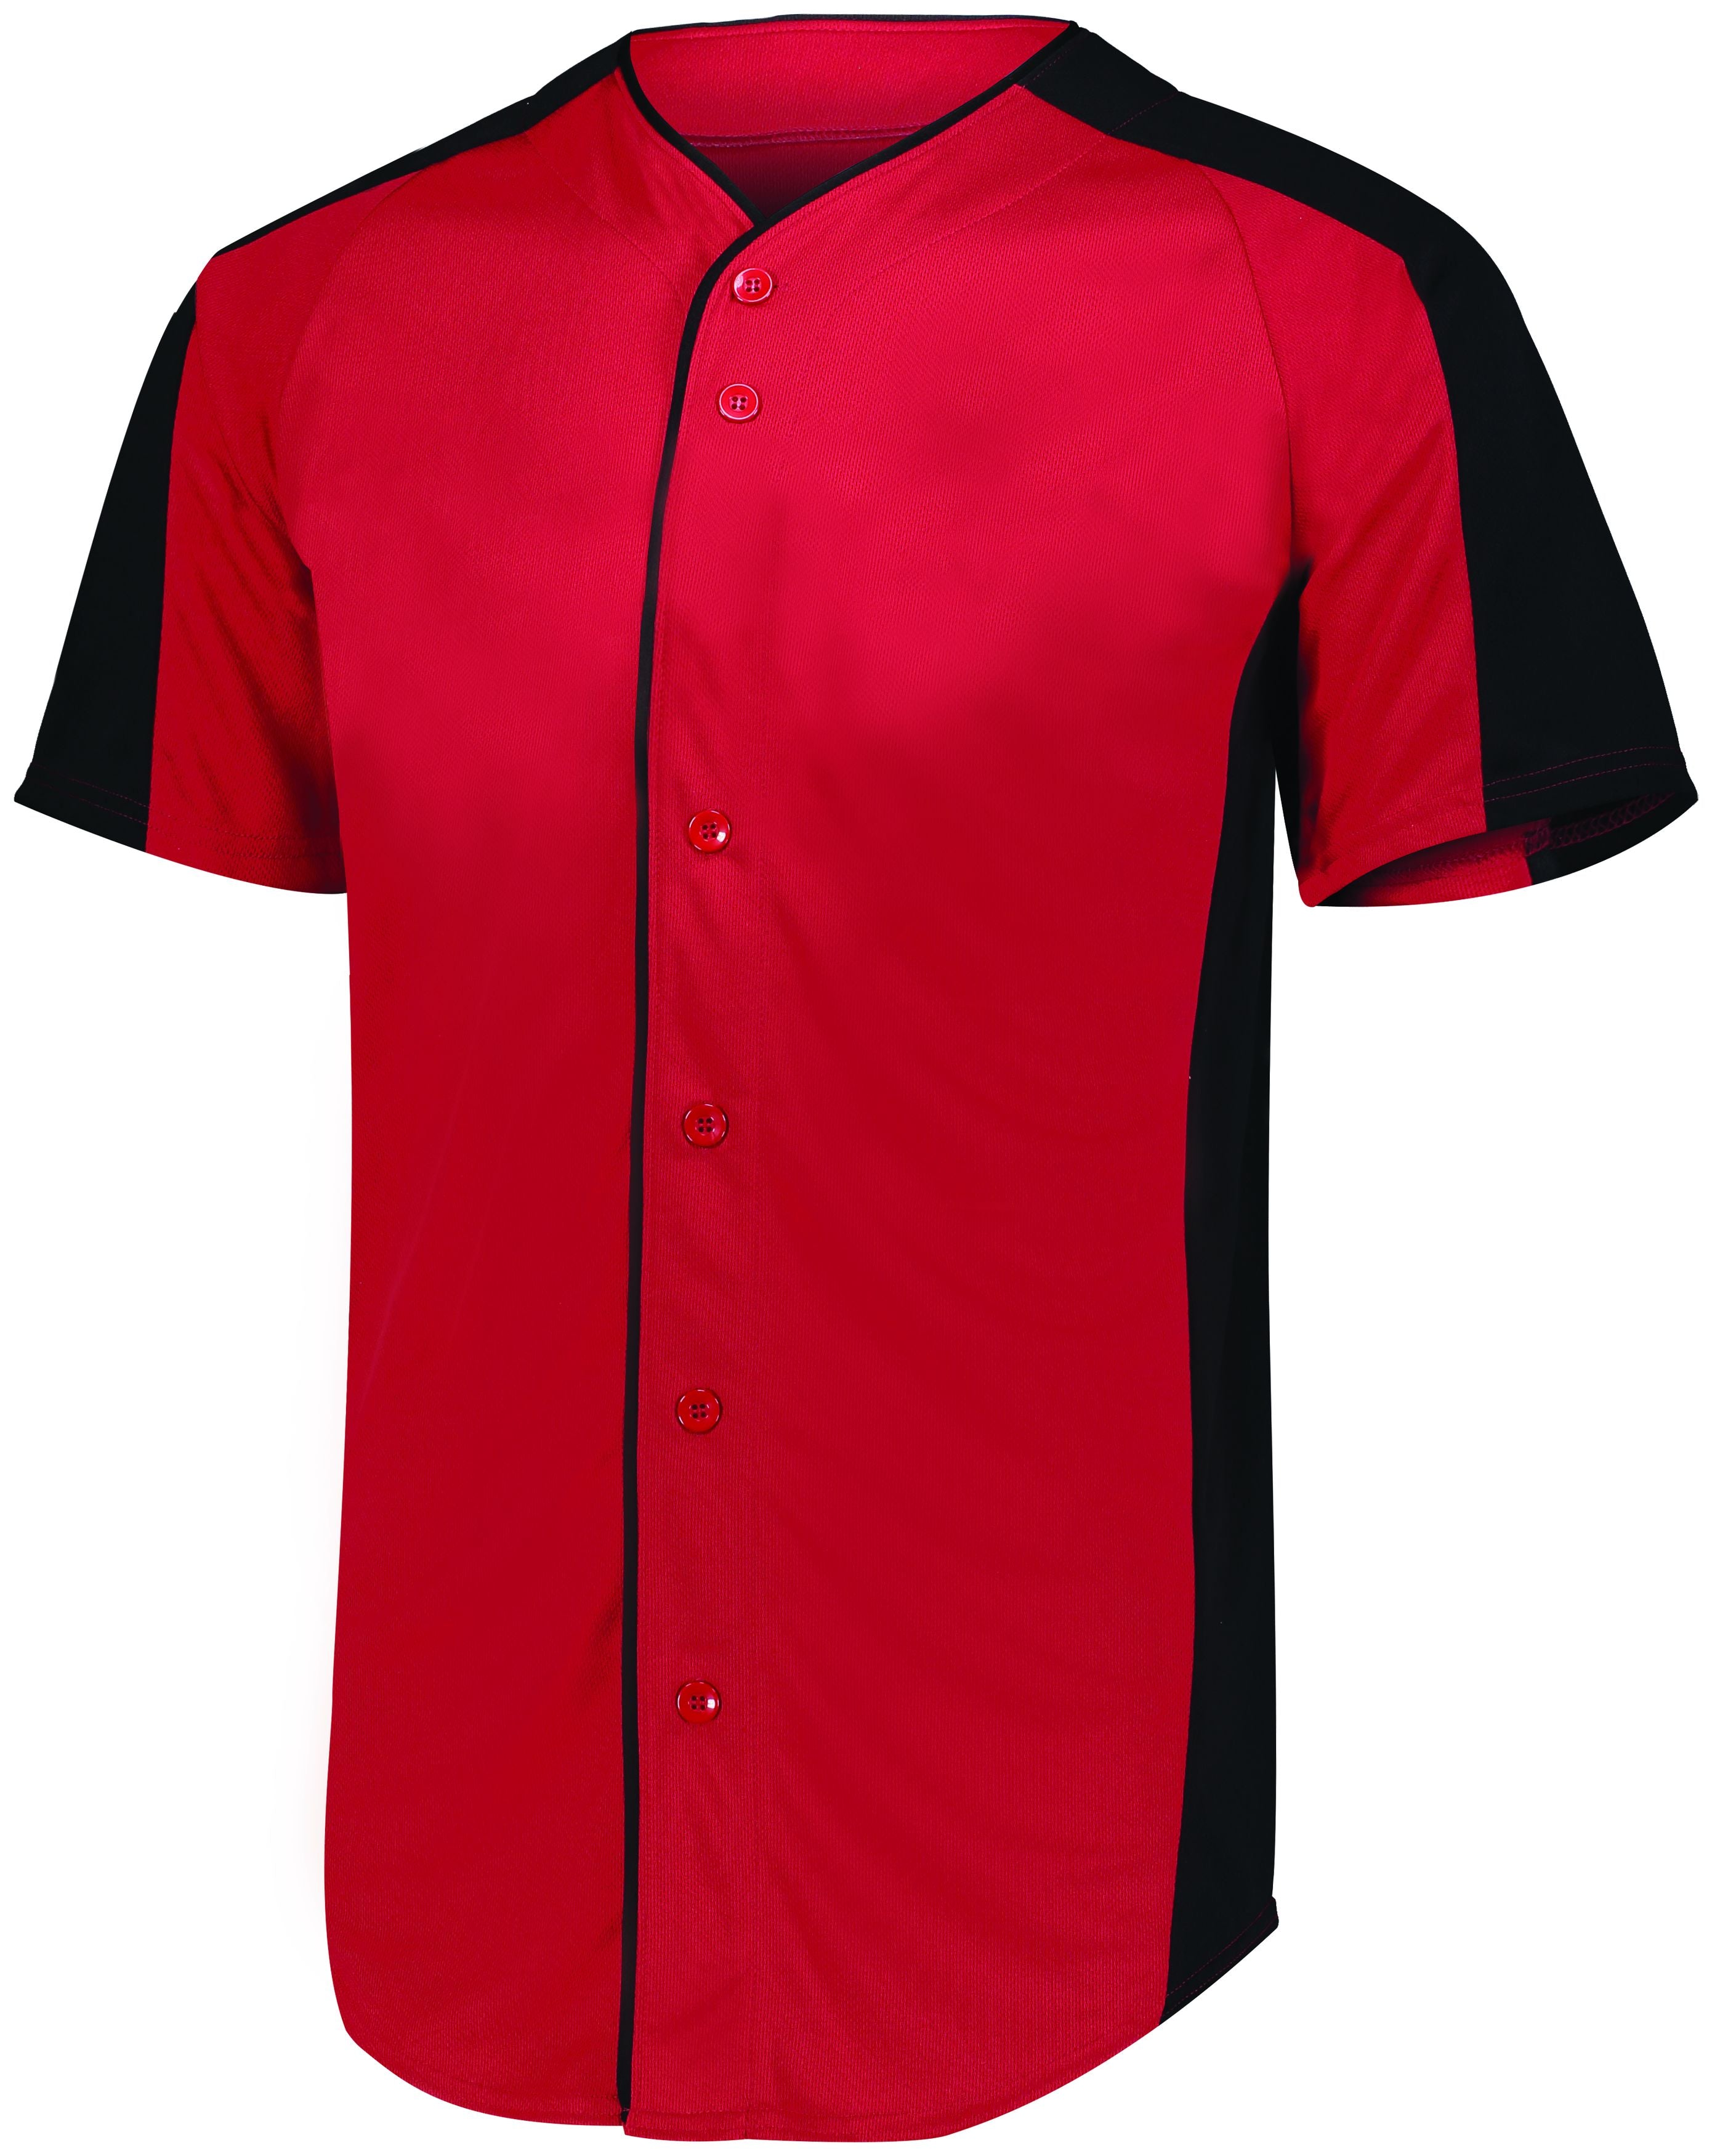 Augusta Sportswear Youth Full-Button Baseball Jersey in Red/Black  -Part of the Youth, Youth-Jersey, Augusta-Products, Baseball, Shirts, All-Sports, All-Sports-1 product lines at KanaleyCreations.com